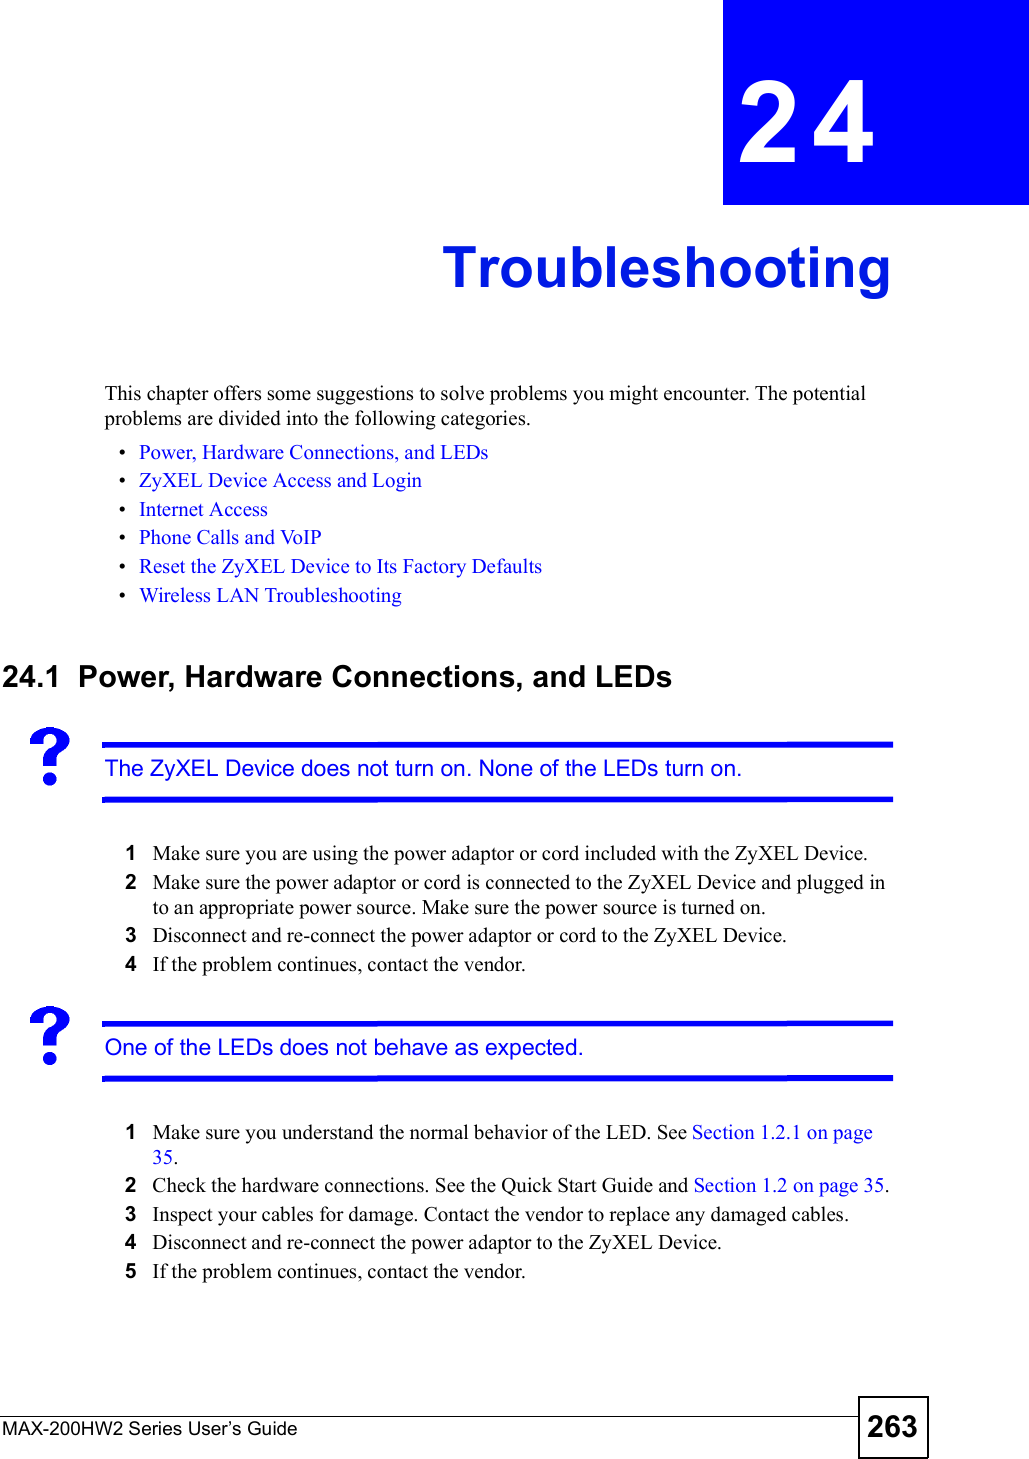 MAX-200HW2 Series User s Guide 263CHAPTER 24TroubleshootingThis chapter offers some suggestions to solve problems you might encounter. The potential problems are divided into the following categories. Power, Hardware Connections, and LEDs ZyXEL Device Access and Login Internet Access Phone Calls and VoIP Reset the ZyXEL Device to Its Factory Defaults Wireless LAN Troubleshooting24.1  Power, Hardware Connections, and LEDsThe ZyXEL Device does not turn on. None of the LEDs turn on.1Make sure you are using the power adaptor or cord included with the ZyXEL Device.2Make sure the power adaptor or cord is connected to the ZyXEL Device and plugged in to an appropriate power source. Make sure the power source is turned on.3Disconnect and re-connect the power adaptor or cord to the ZyXEL Device.4If the problem continues, contact the vendor.One of the LEDs does not behave as expected.1Make sure you understand the normal behavior of the LED. See Section 1.2.1 on page 35.2Check the hardware connections. See the Quick Start Guide and Section 1.2 on page 35.3Inspect your cables for damage. Contact the vendor to replace any damaged cables.4Disconnect and re-connect the power adaptor to the ZyXEL Device.5If the problem continues, contact the vendor.